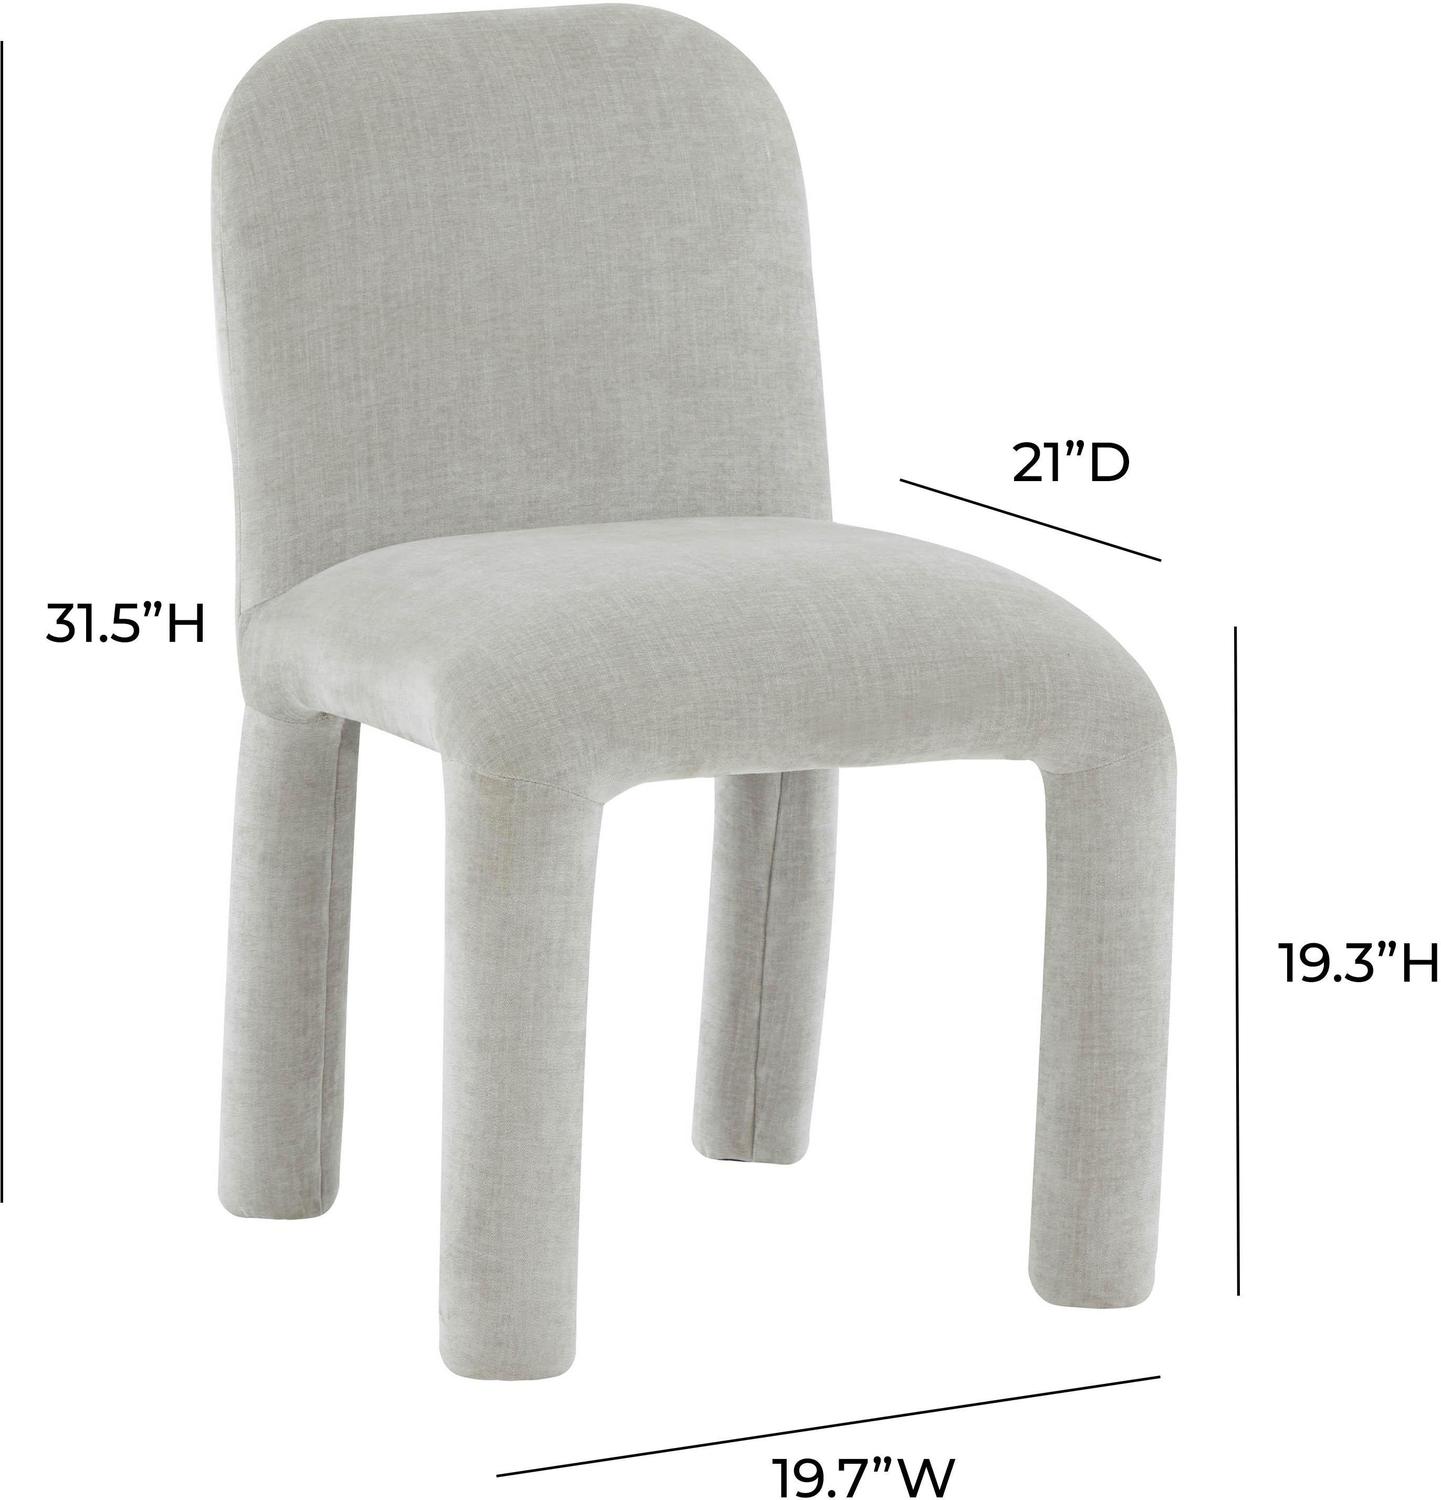 edloe finch dining chairs Contemporary Design Furniture Dining Chairs Light Grey